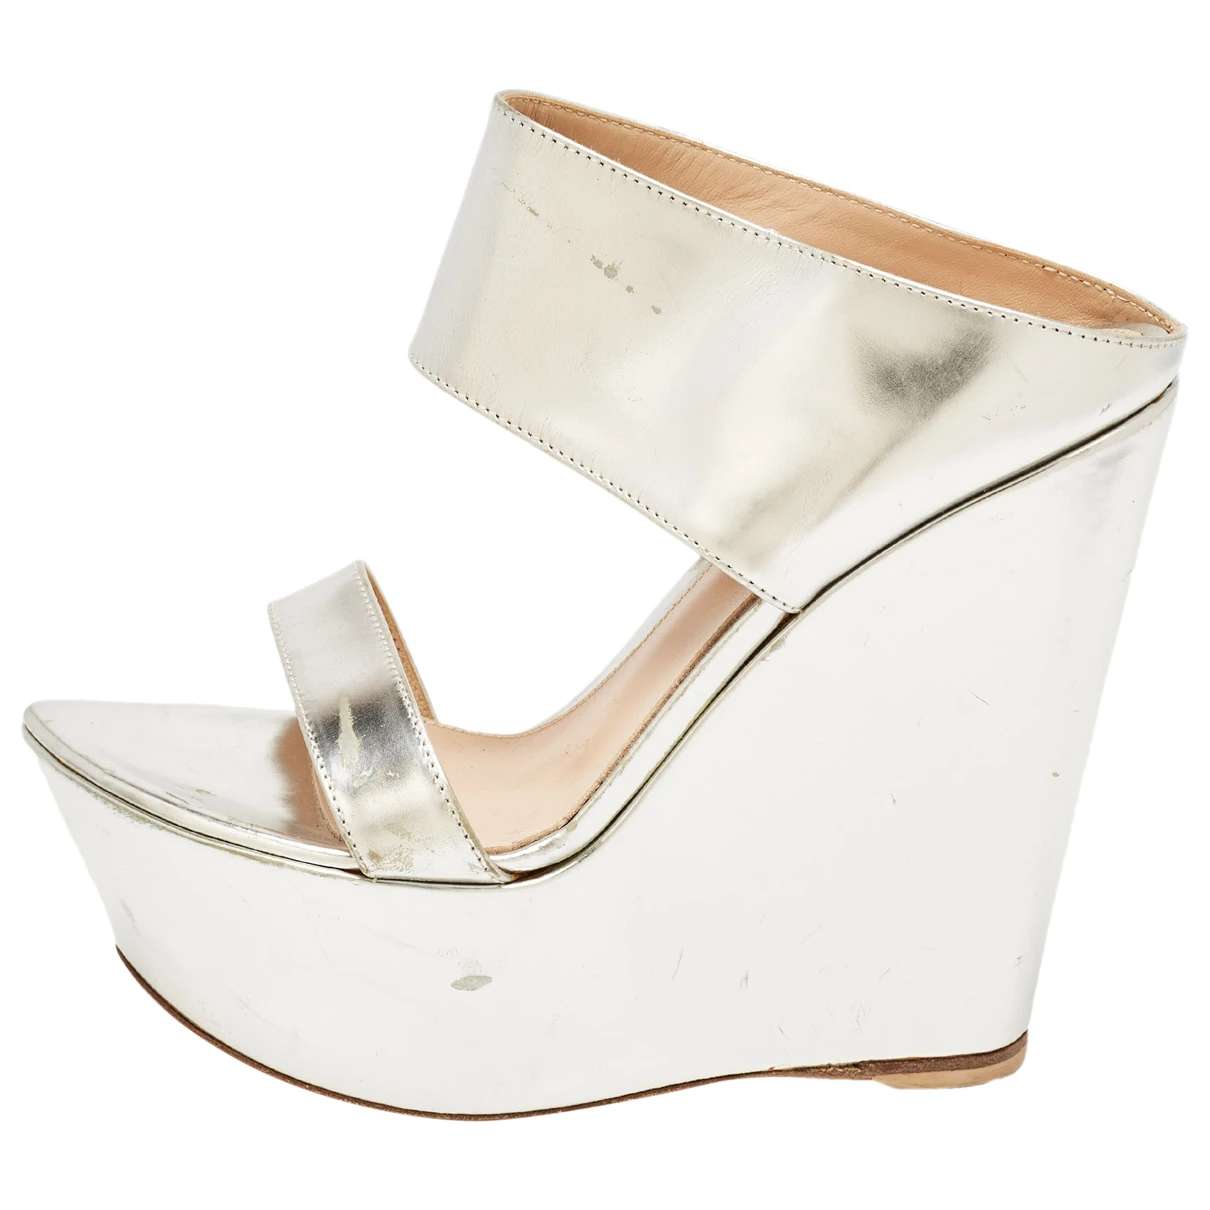 Pre-owned Gianvito Rossi Patent Leather Sandal In Metallic